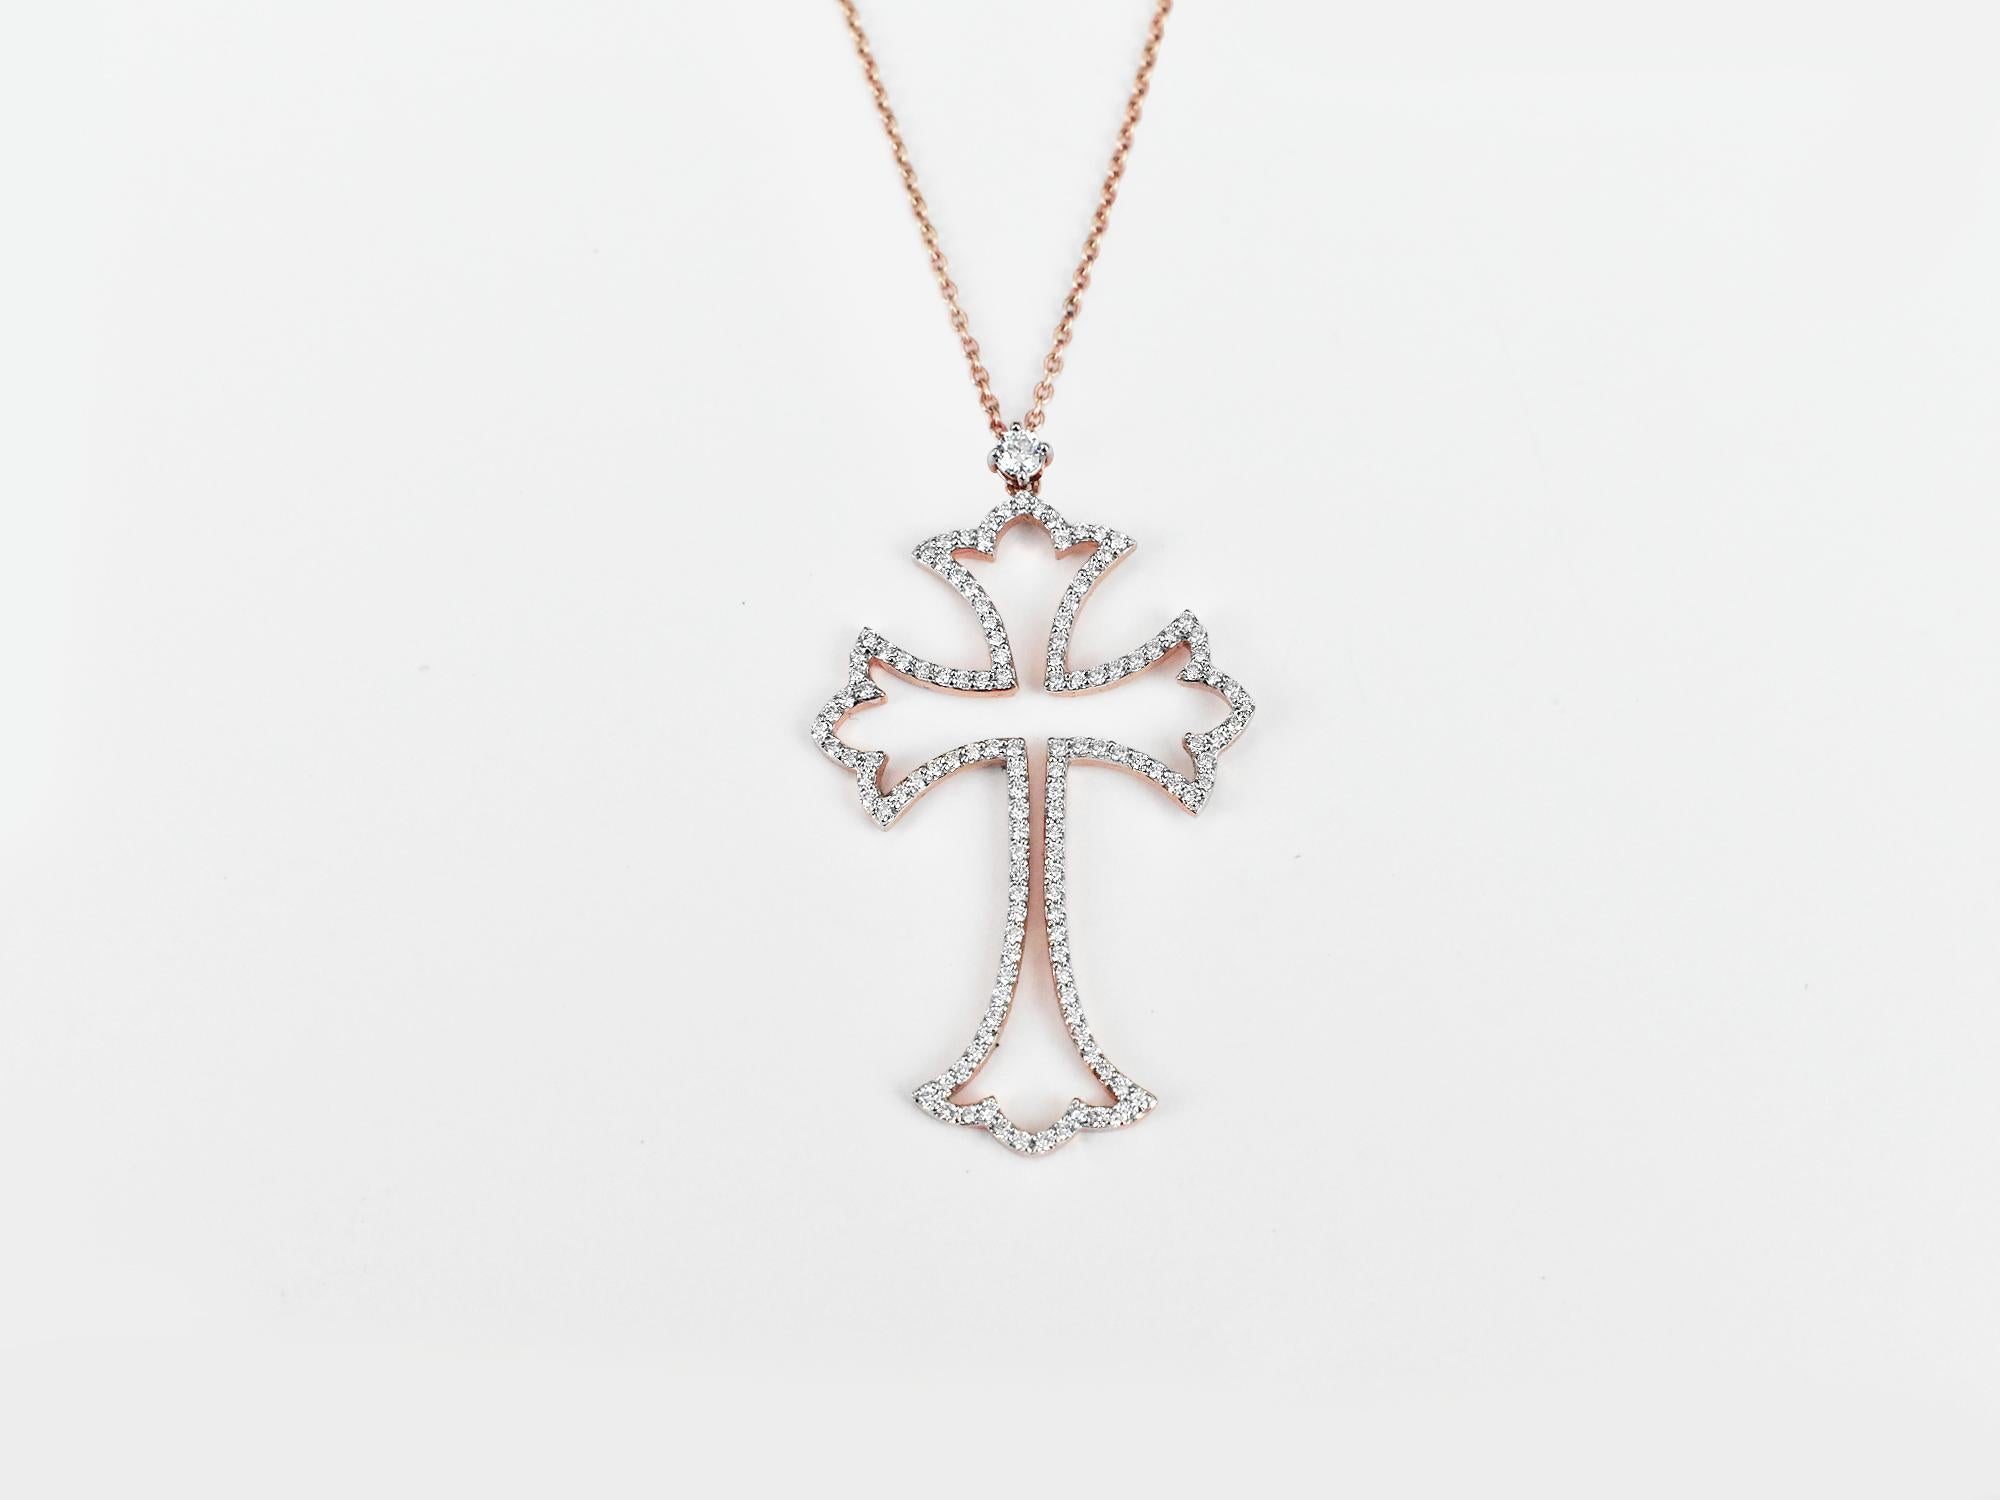 18Karat Gold Pendant Necklace Rose Gold Cross Diamond Pave
      18K Rose gold cross pendant. A universal symbol of faith & belief, glittering diamonds showcased in truly timeless jewels and eternally elegant. Crafted with the joyful and brilliant